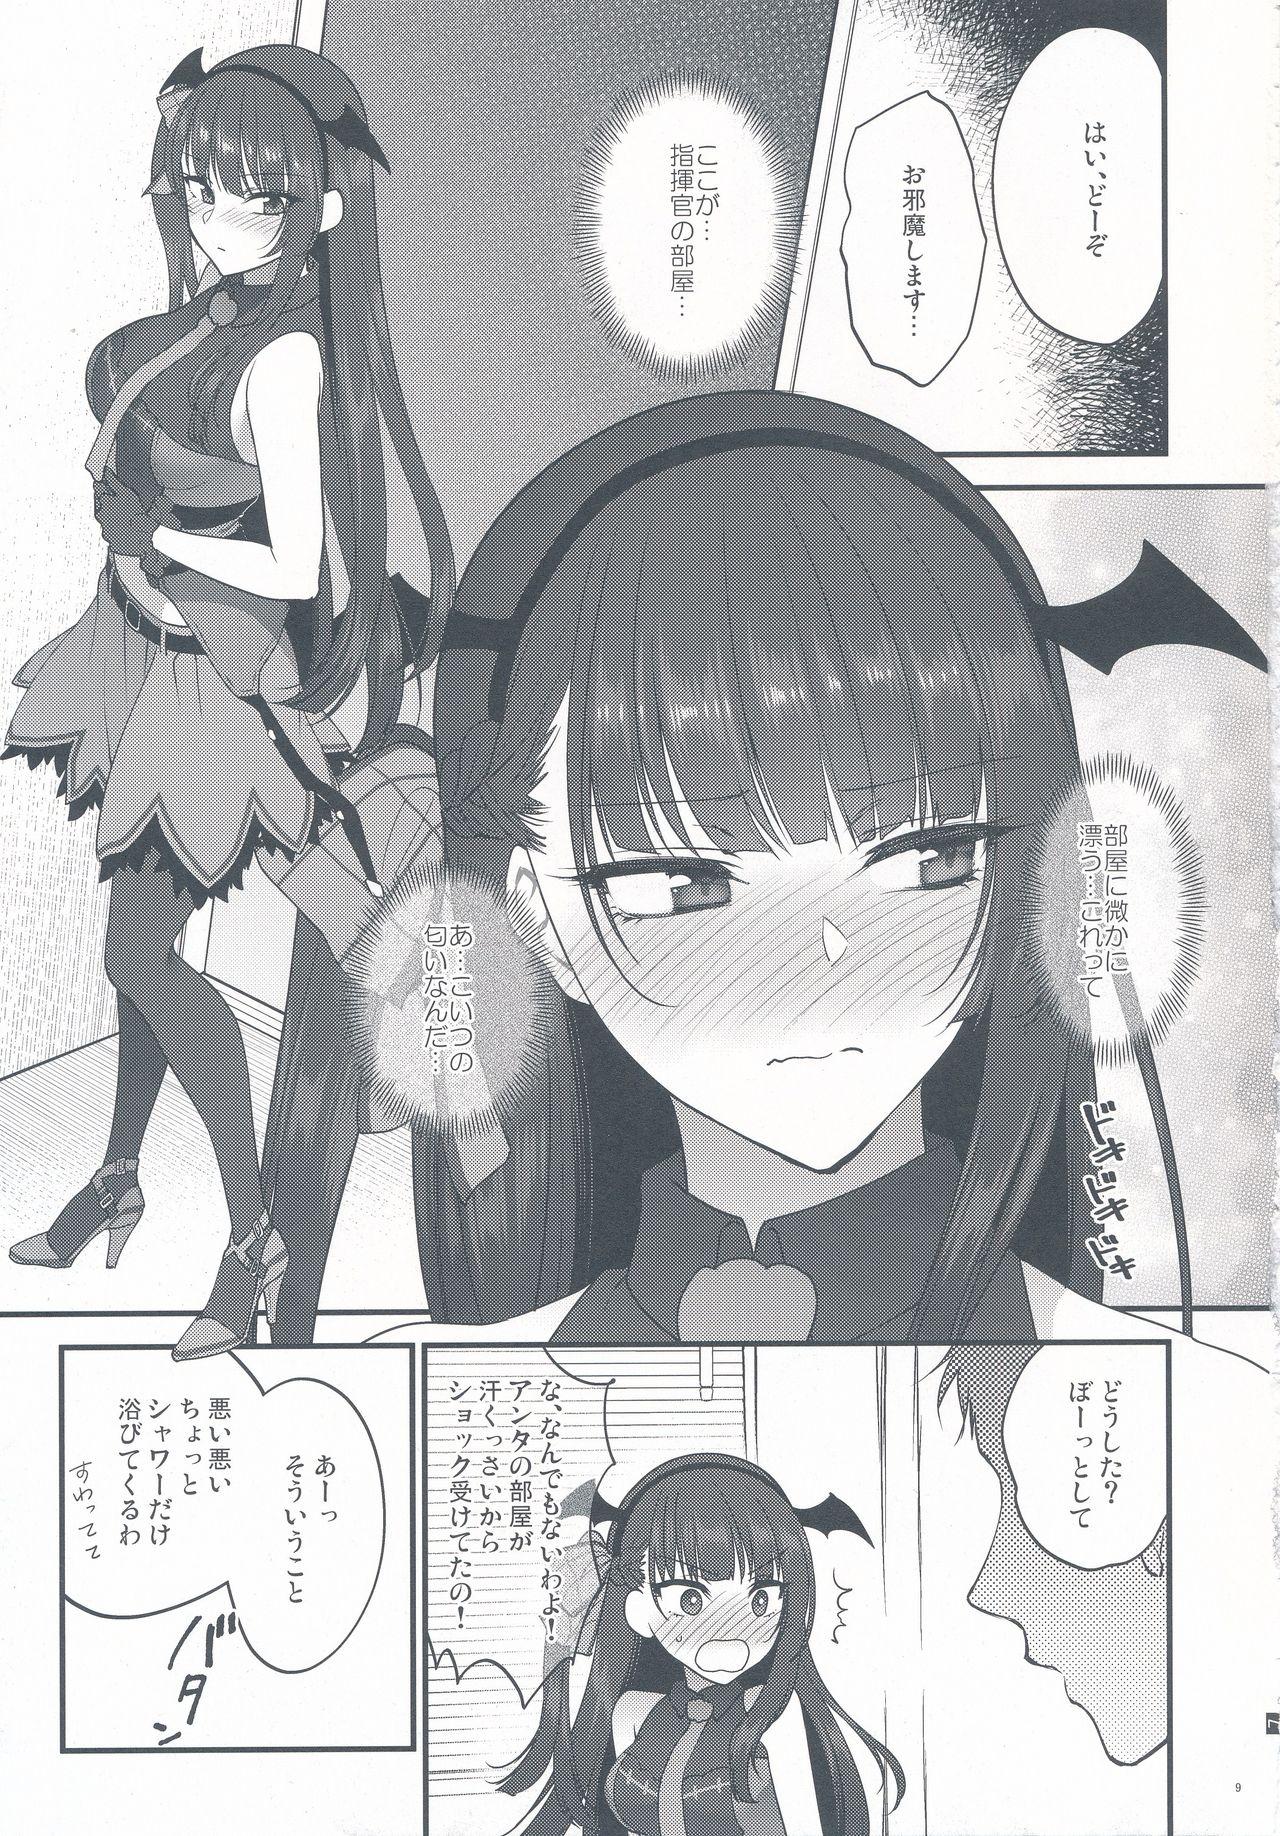 Whipping Obake nante Inai! - Girls frontline Pissing - Page 9